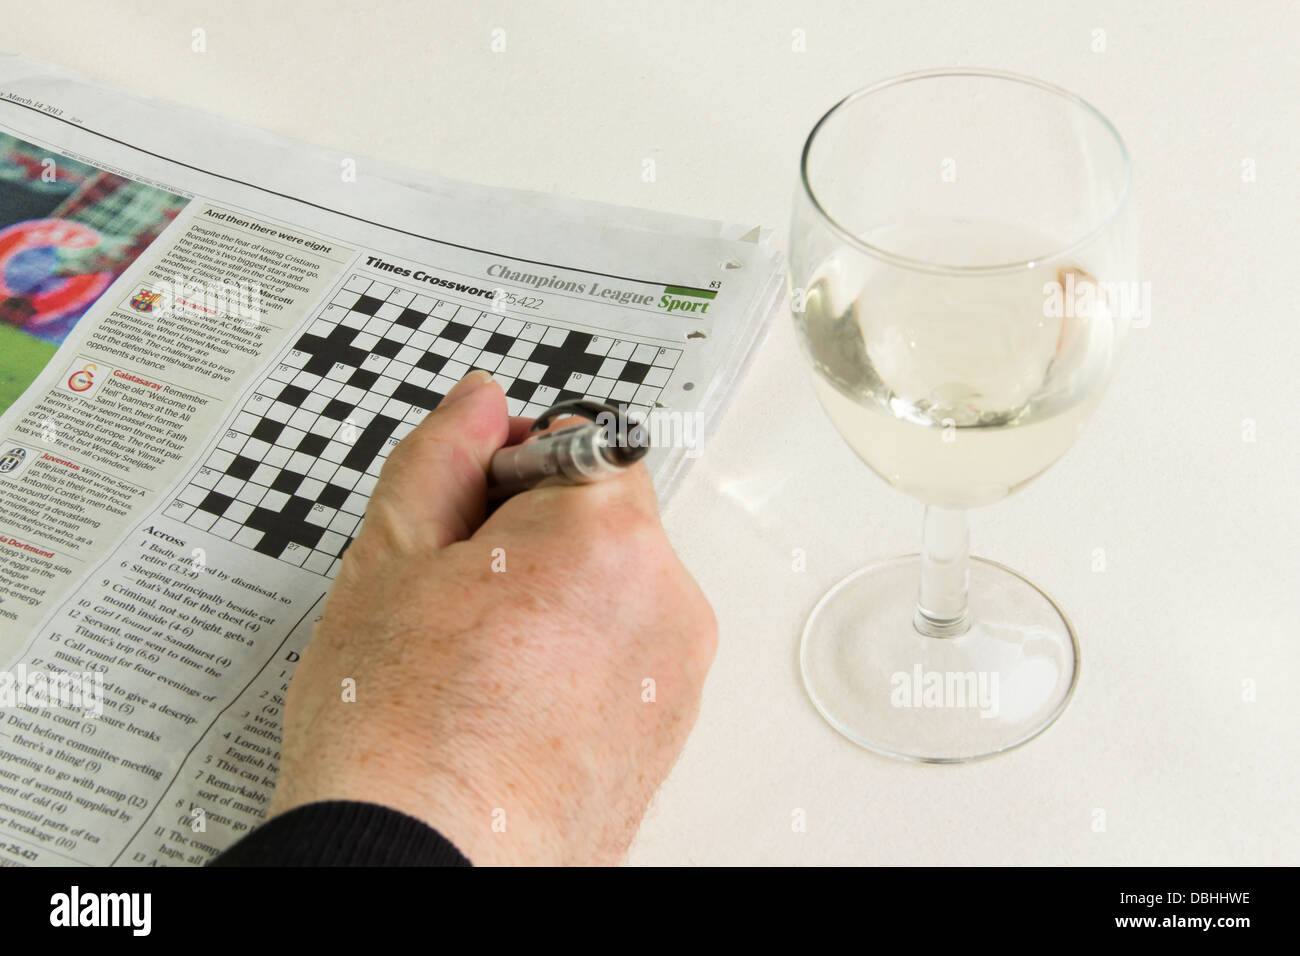 The Times newspaper open at the cryptic crossword page with a man's hand holding a pen and a glass of white wine beside it. Stock Photo